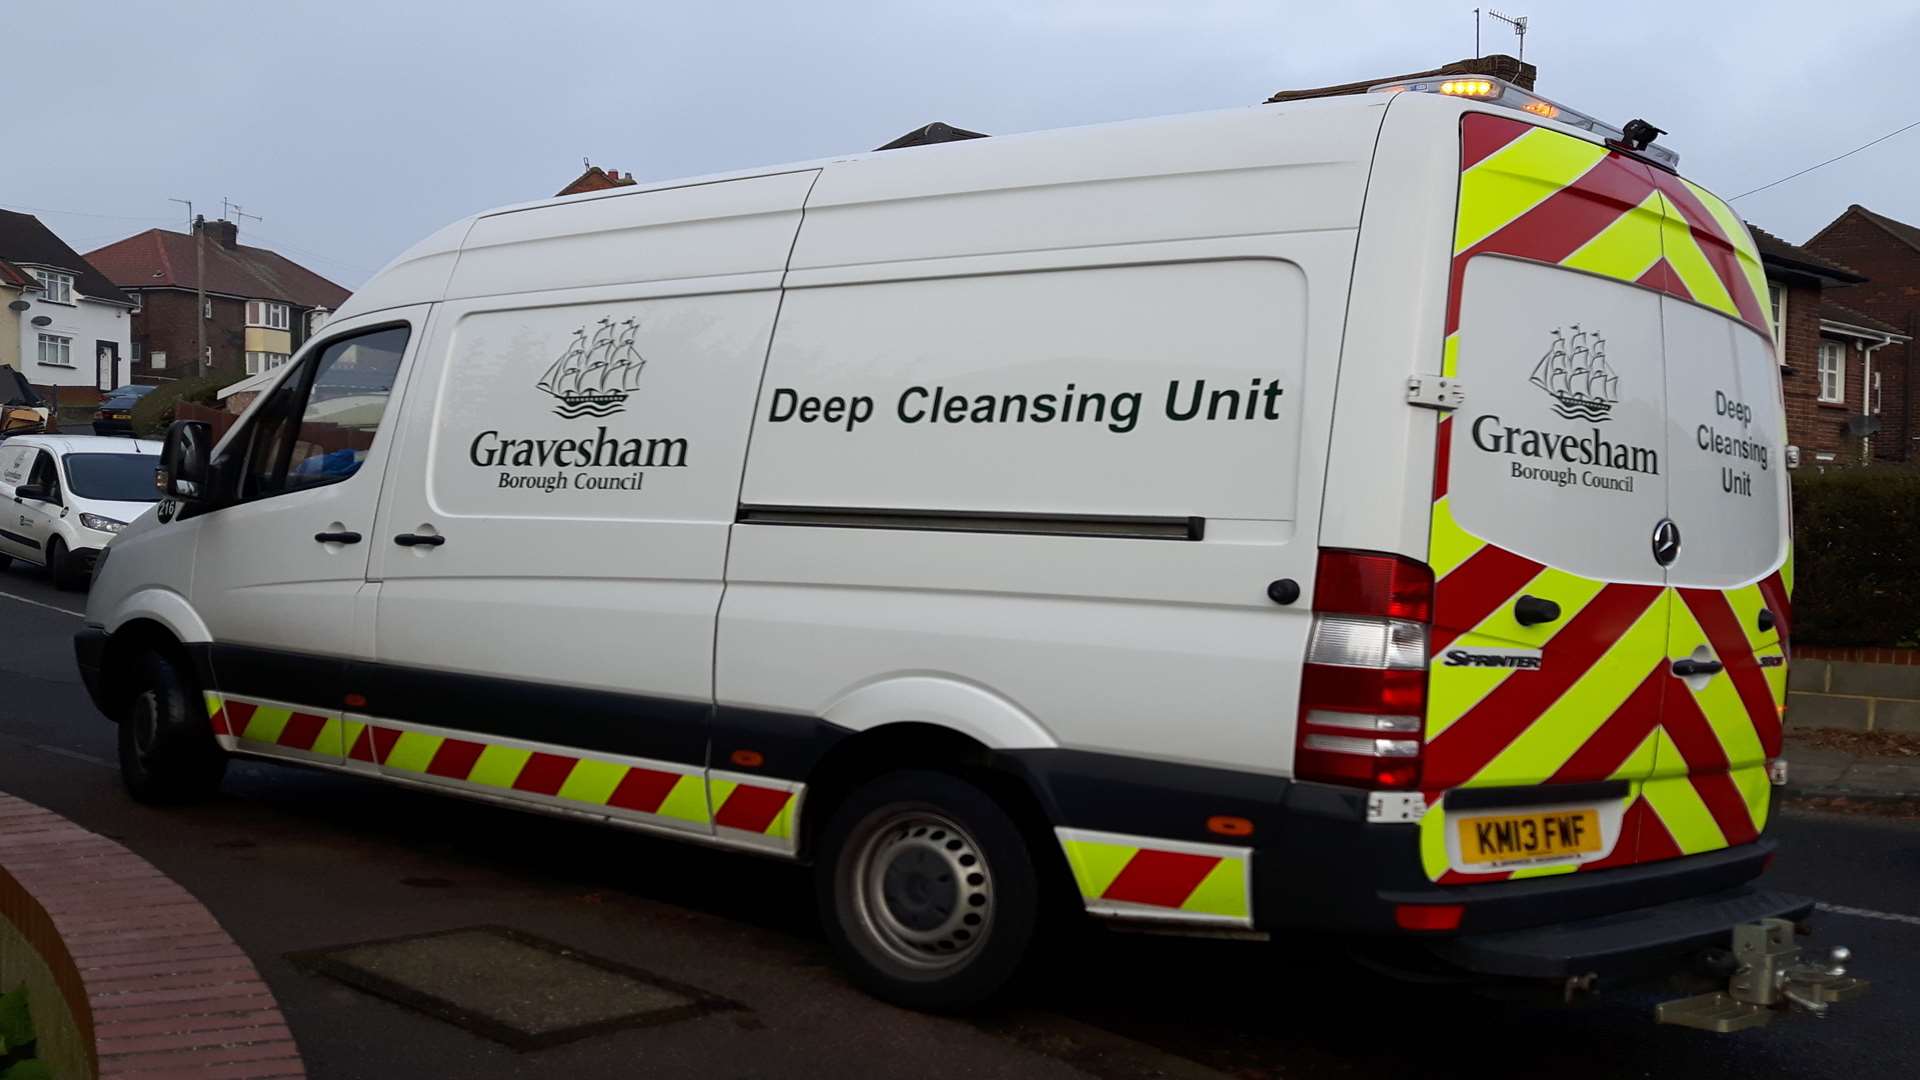 Gravesham council deep cleaning services called in to remove the blood from the street.